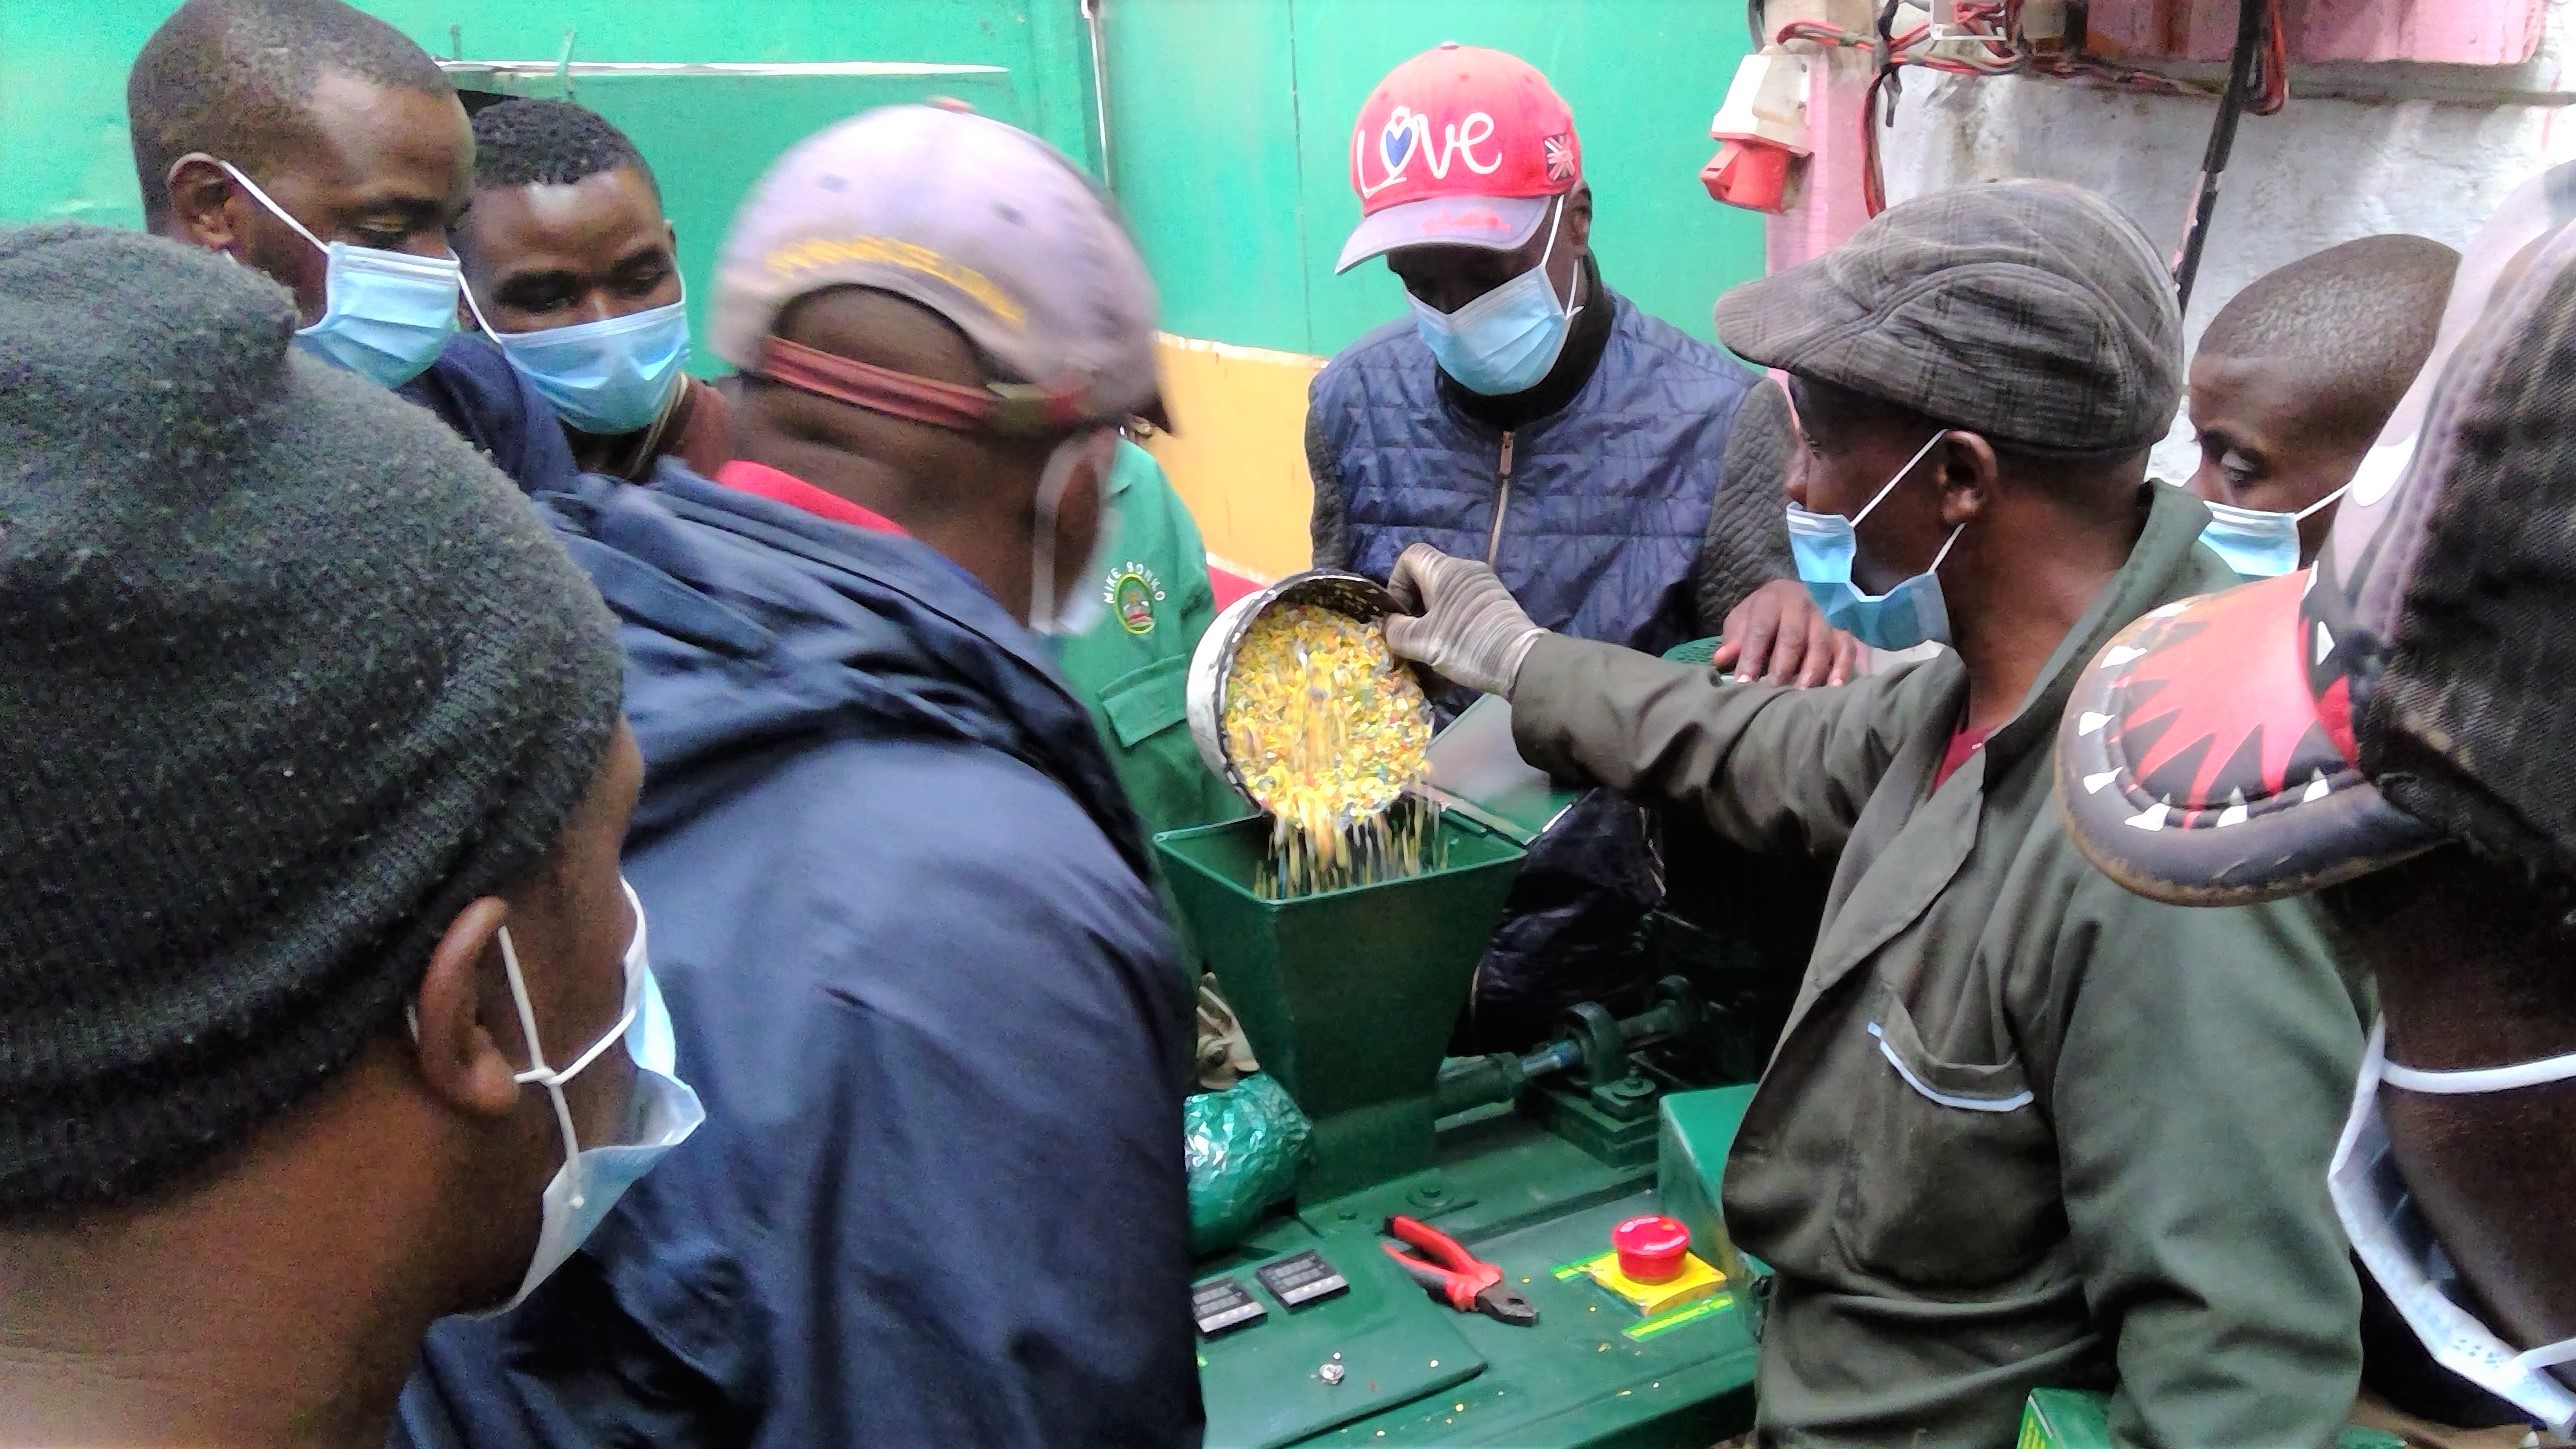 Young people in Nairobi’s informal settlement of Mathare are trained by UN-Habitat on using a new plastic recycling machine to generate livelihoods lost as a result of COVID-19 in November 2020 